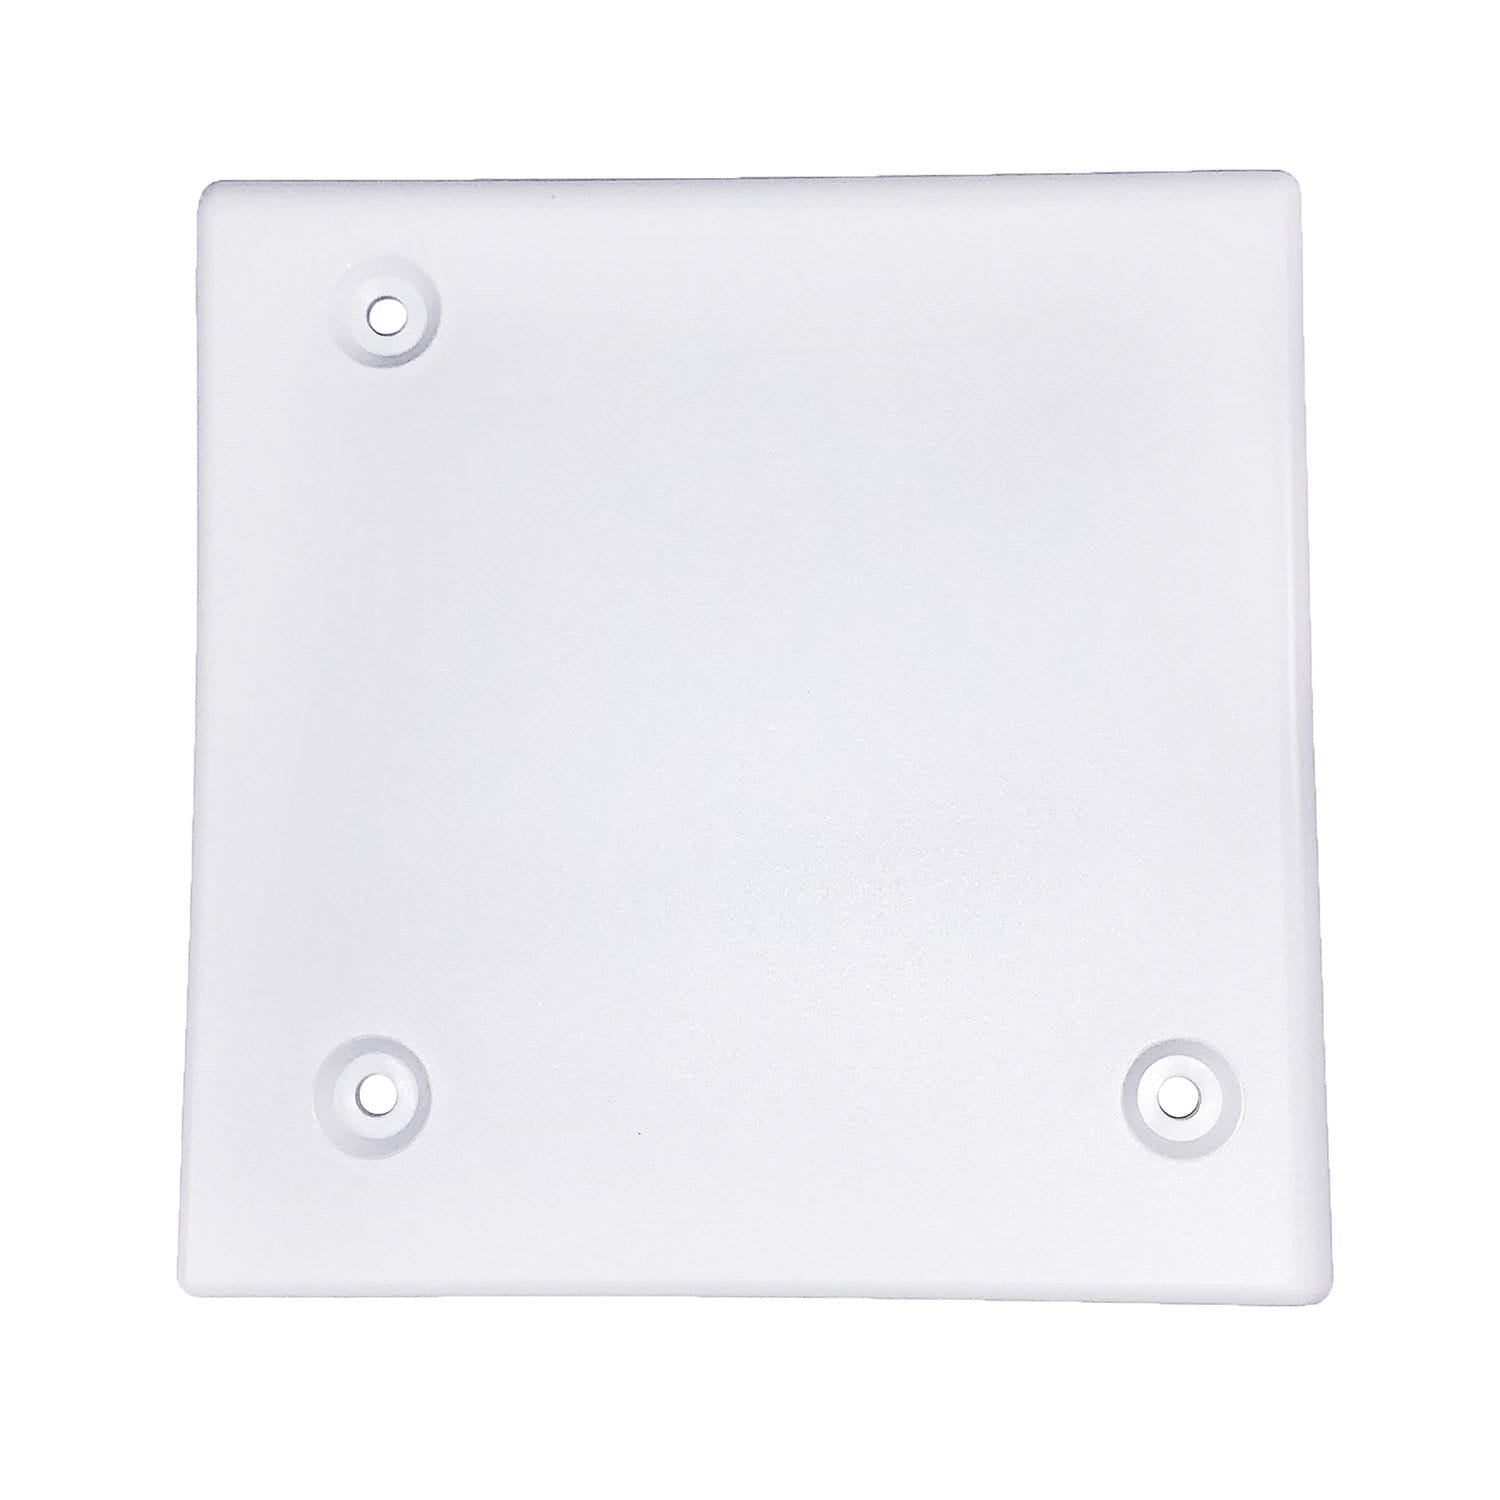 Thetford 94291 (601-022-94291) 4.75" Square Slide-Out Extrusion Cover, White